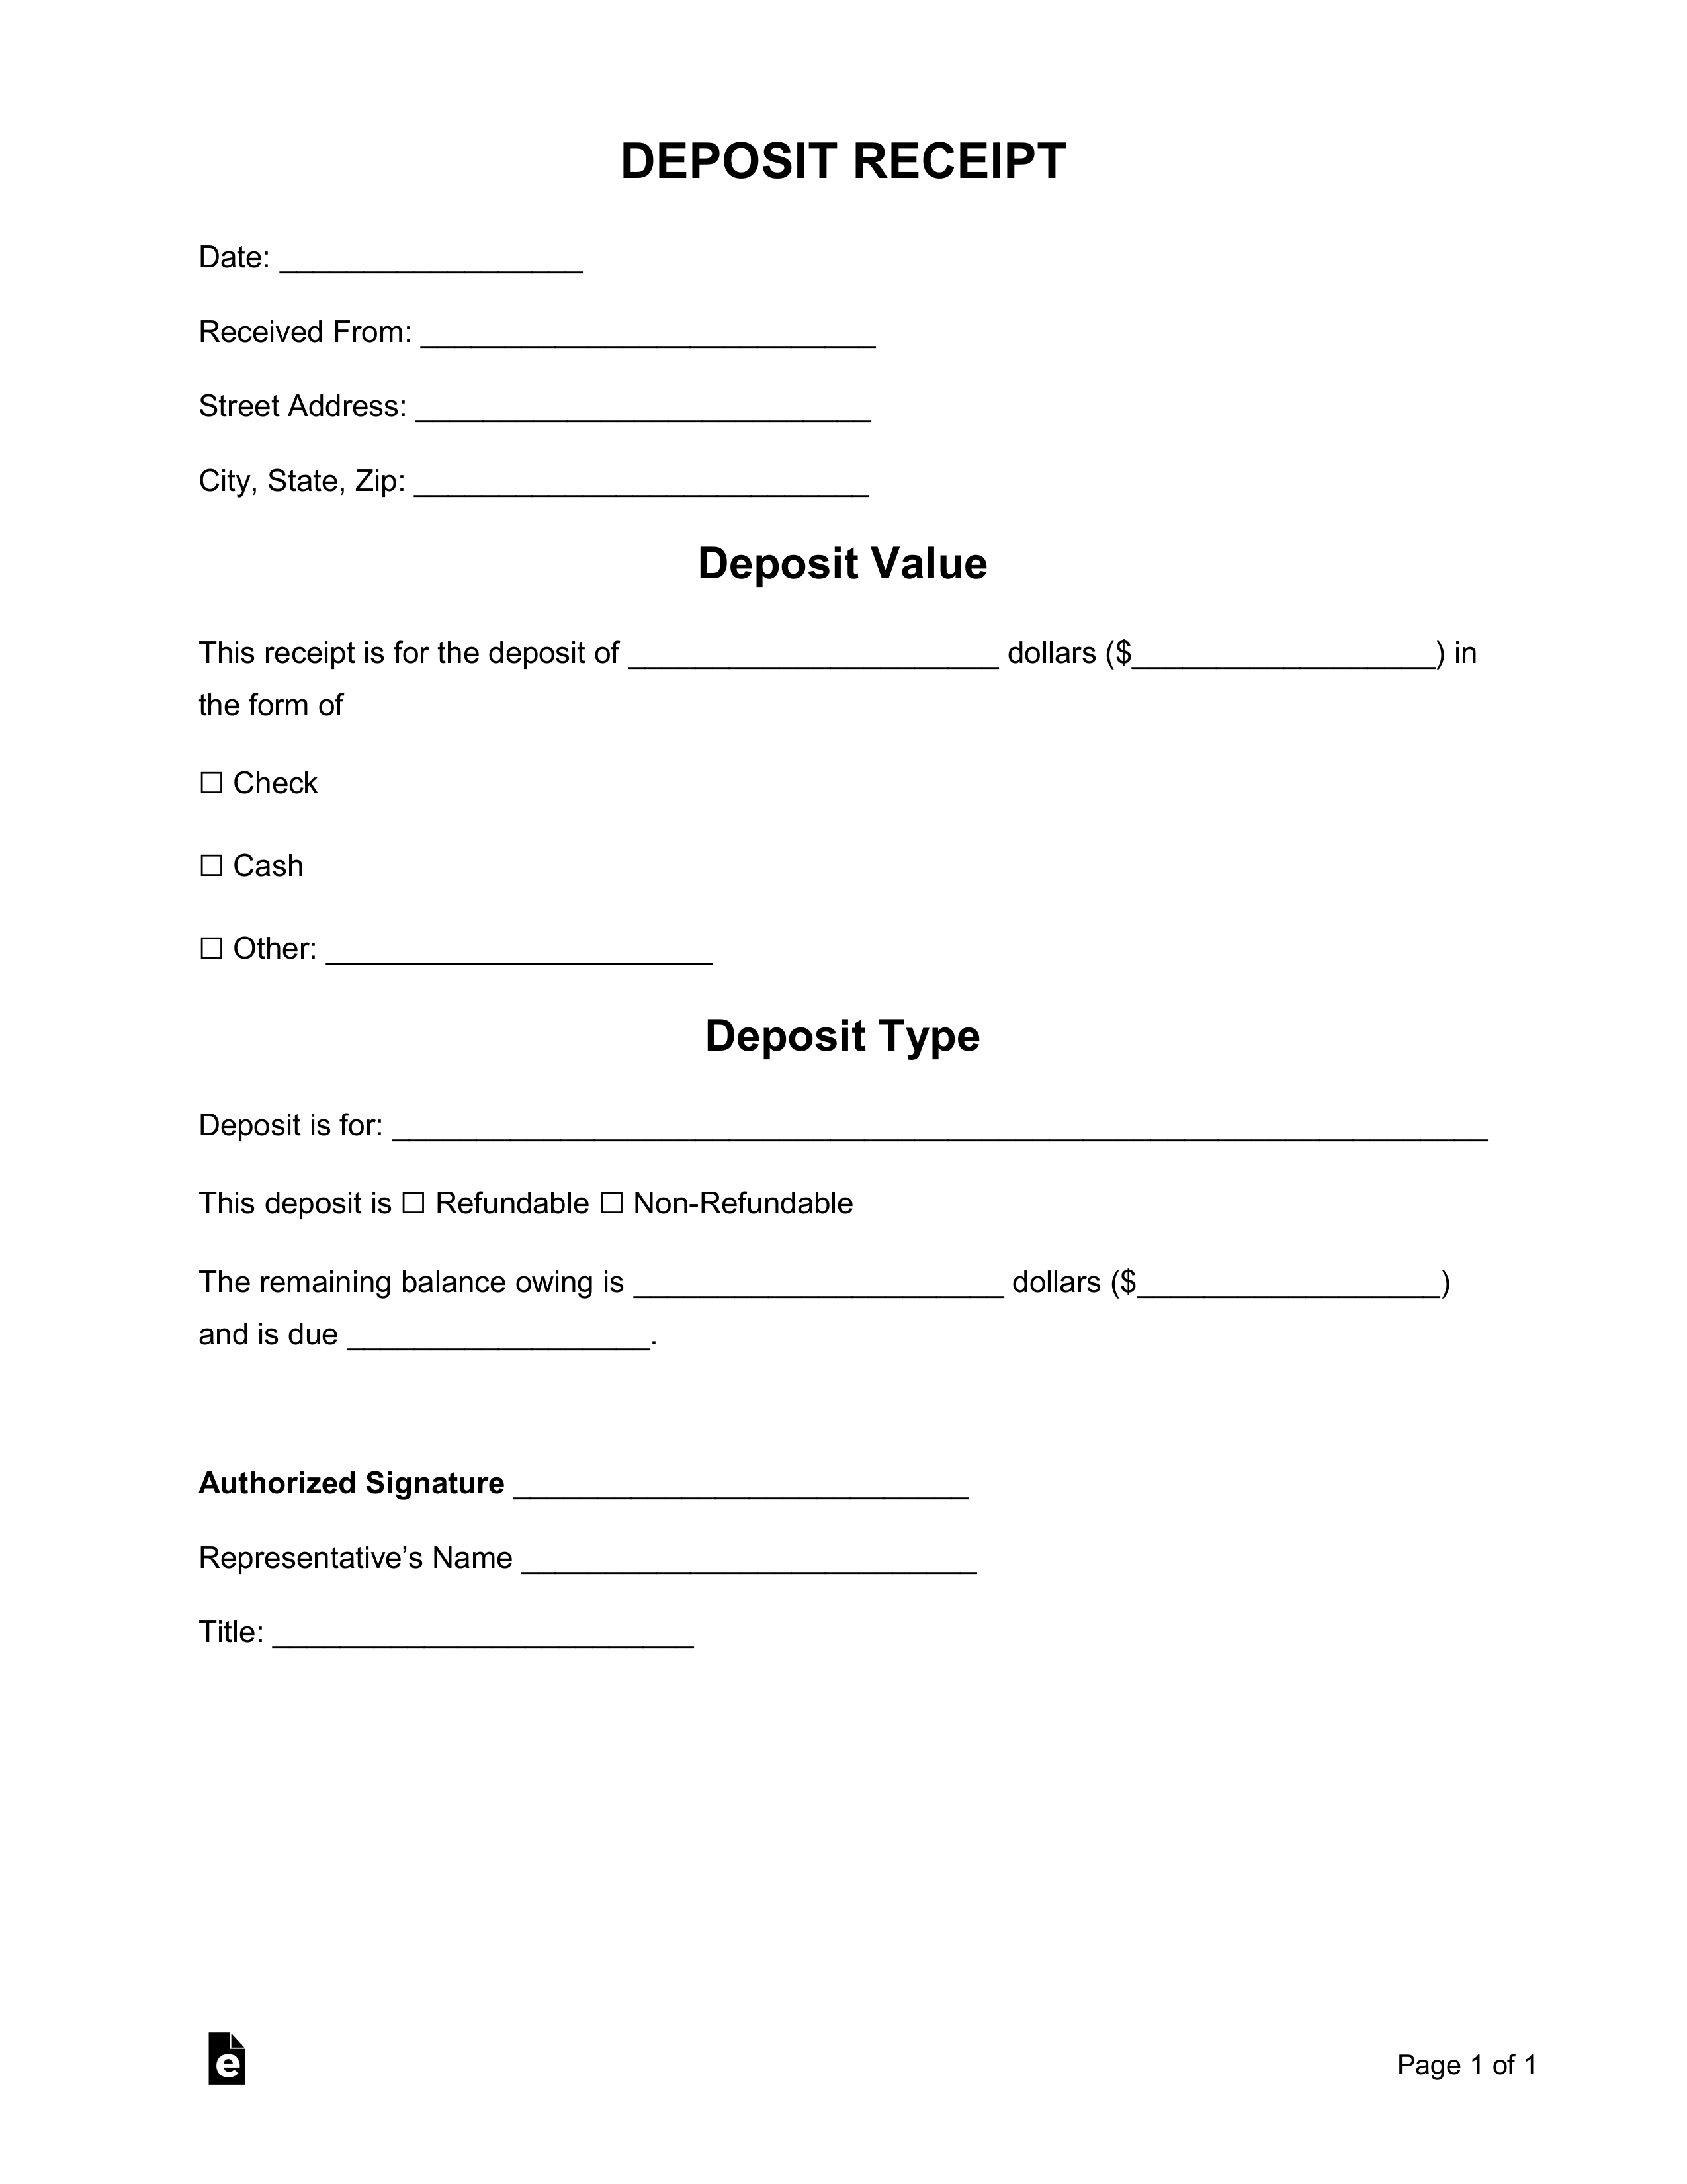 Free Deposit Receipt Templates - Word  PDF – eForms In Deposit Release Form Template With Regard To Deposit Release Form Template